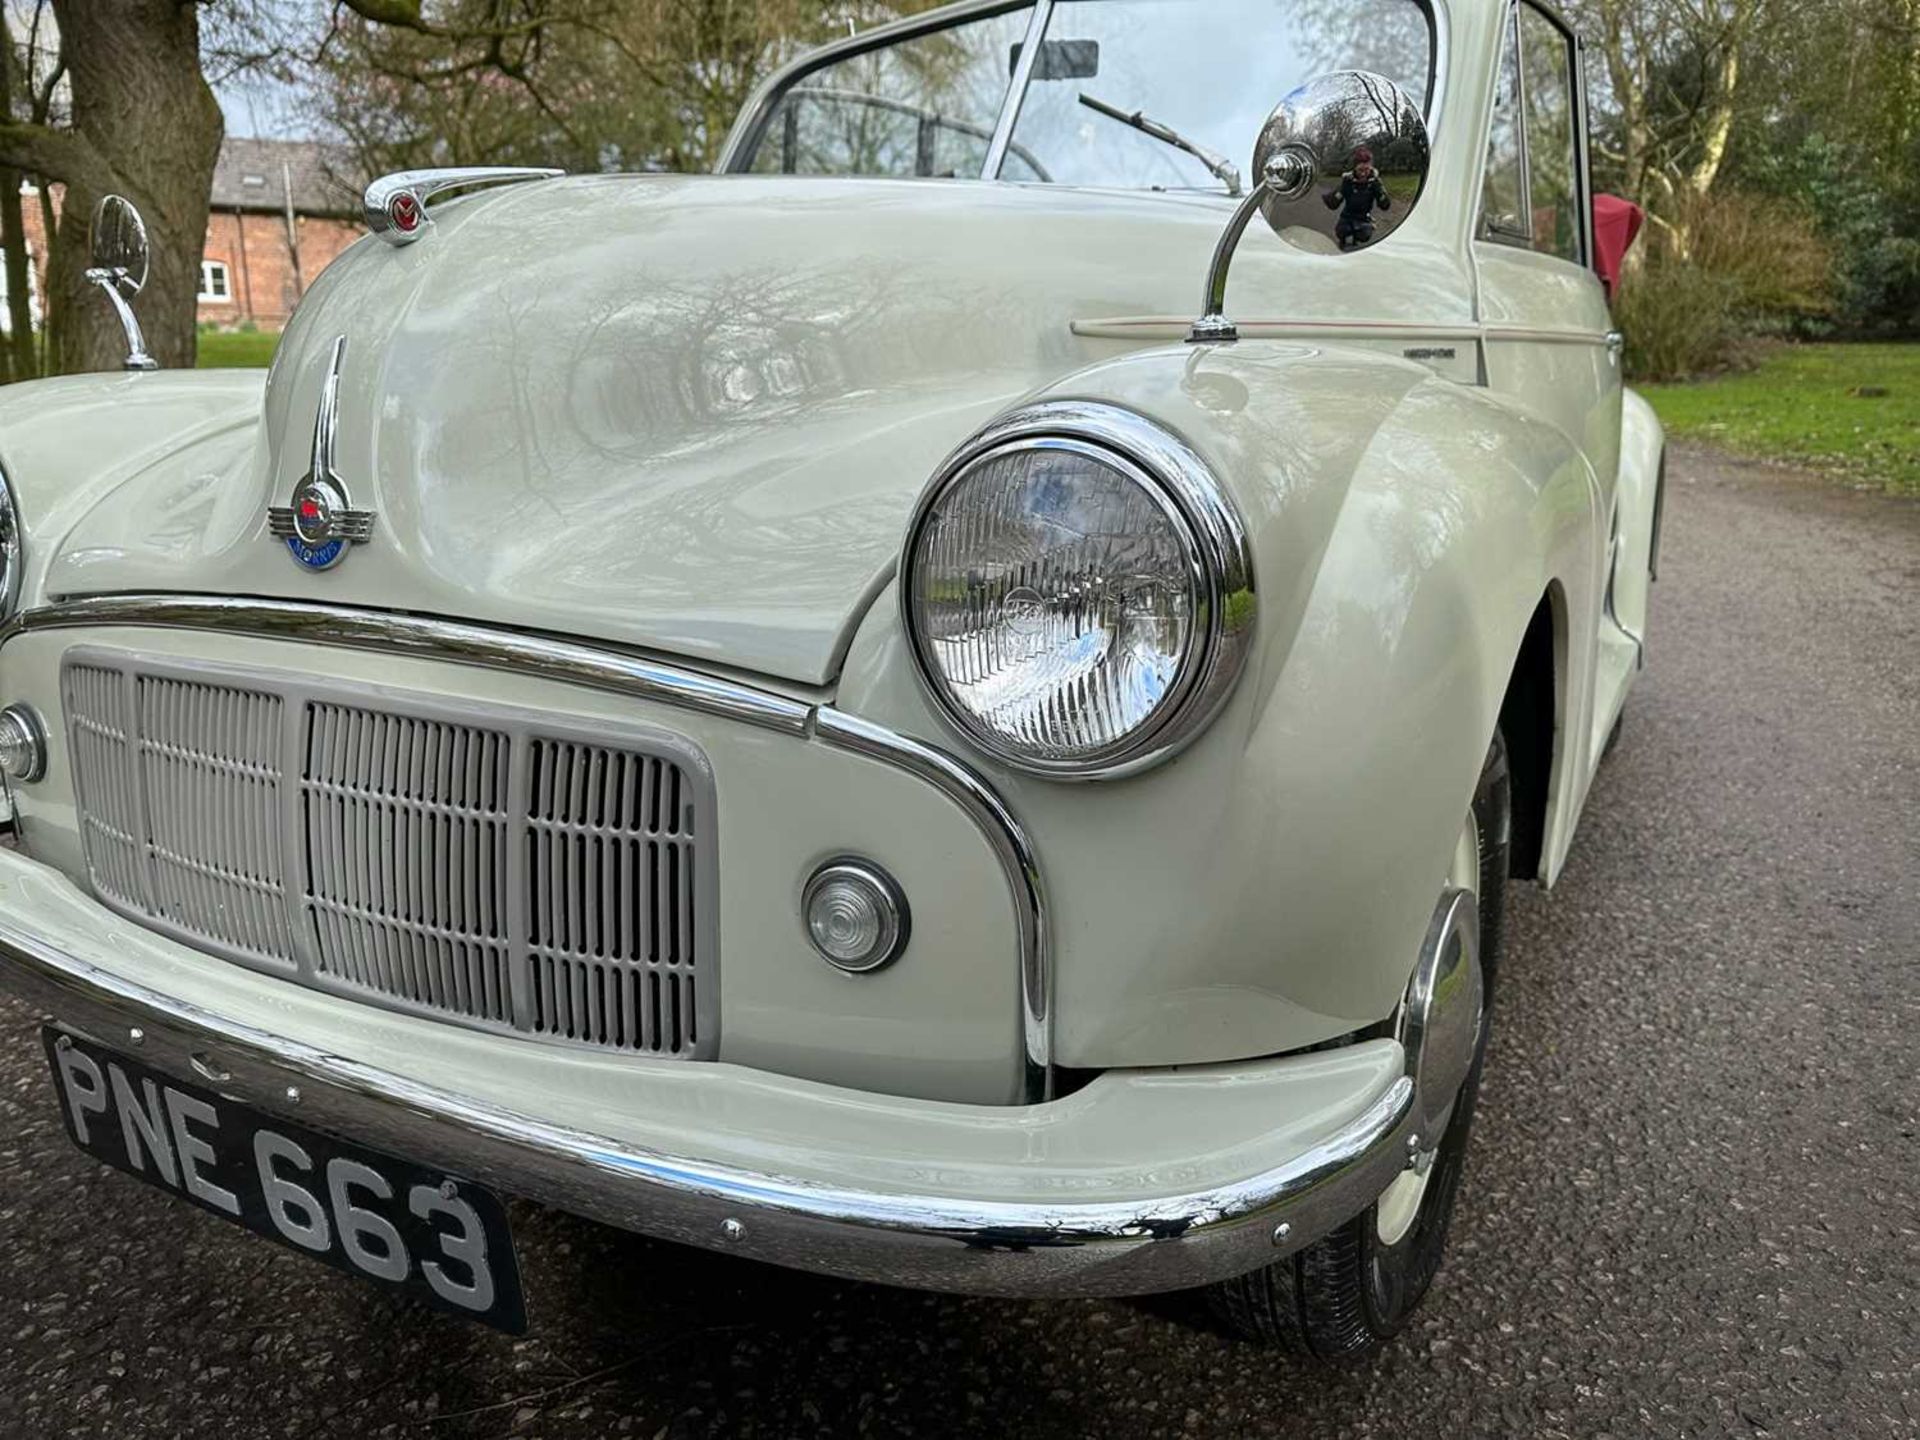 1954 Morris Minor Tourer Fully restored to concours standard - Image 94 of 100